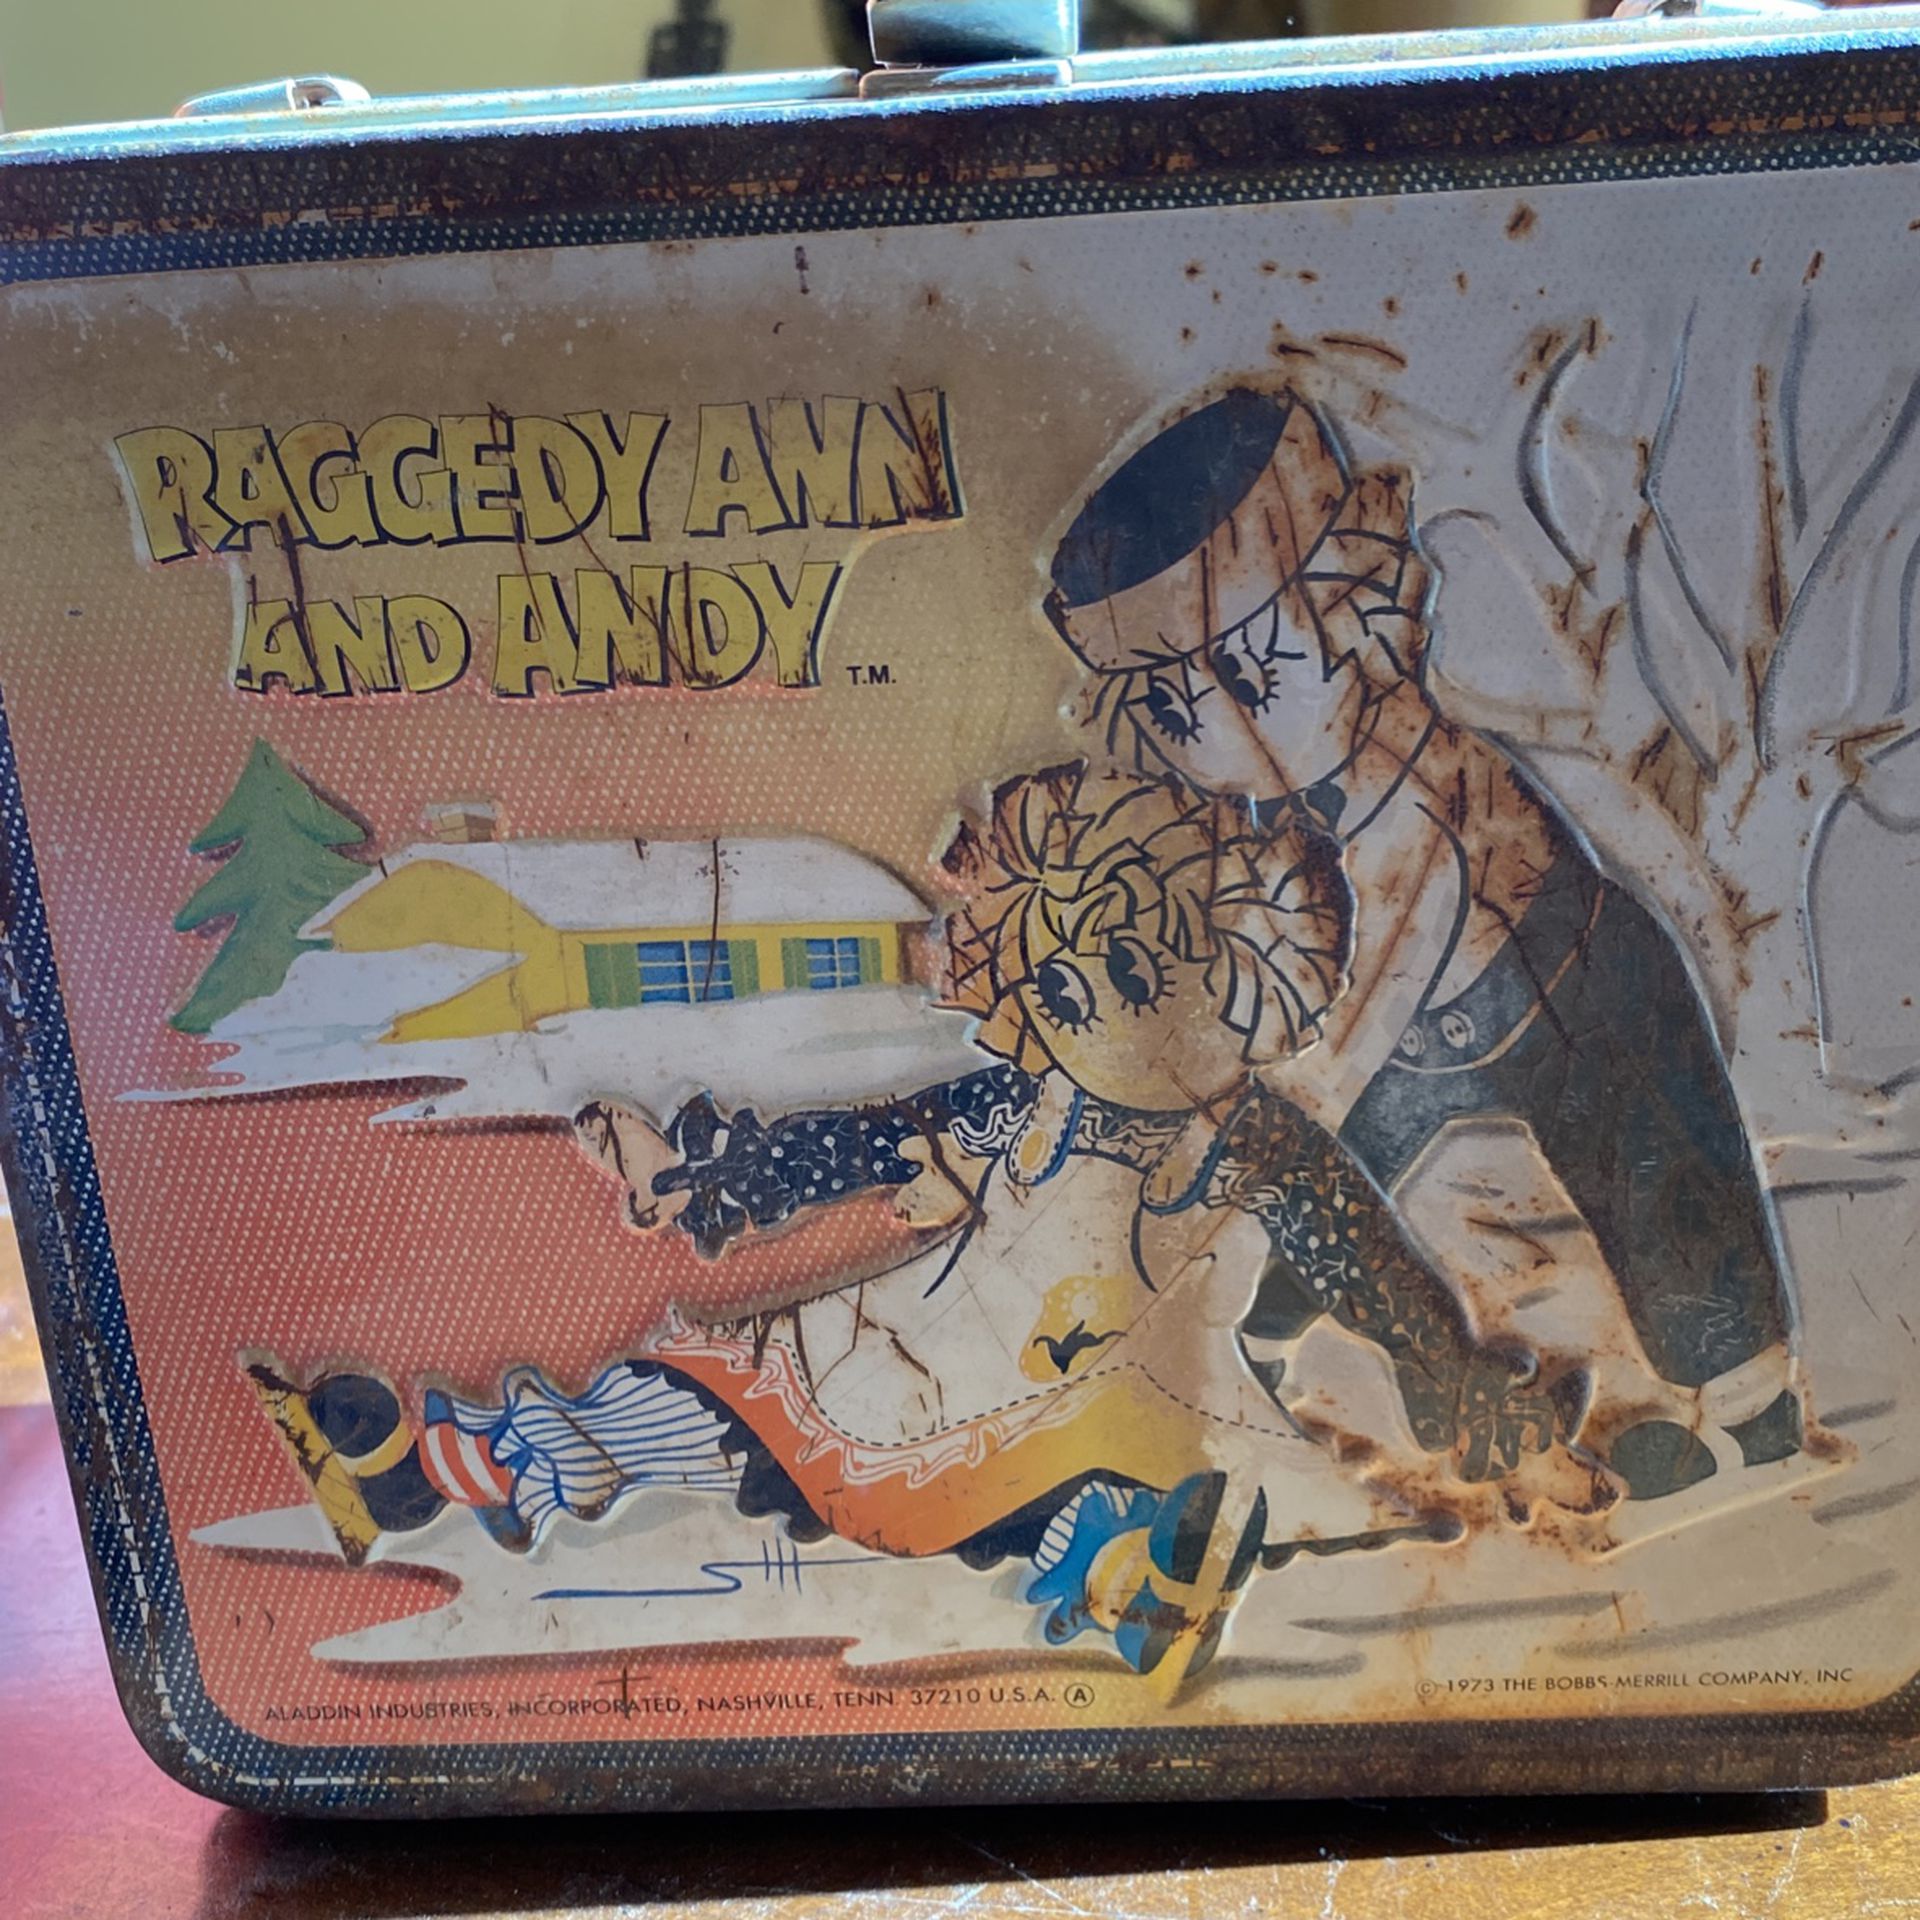 Vintage Raggedy Ann and Andy Lunch Pail 1973 No Thermos $35 Obo